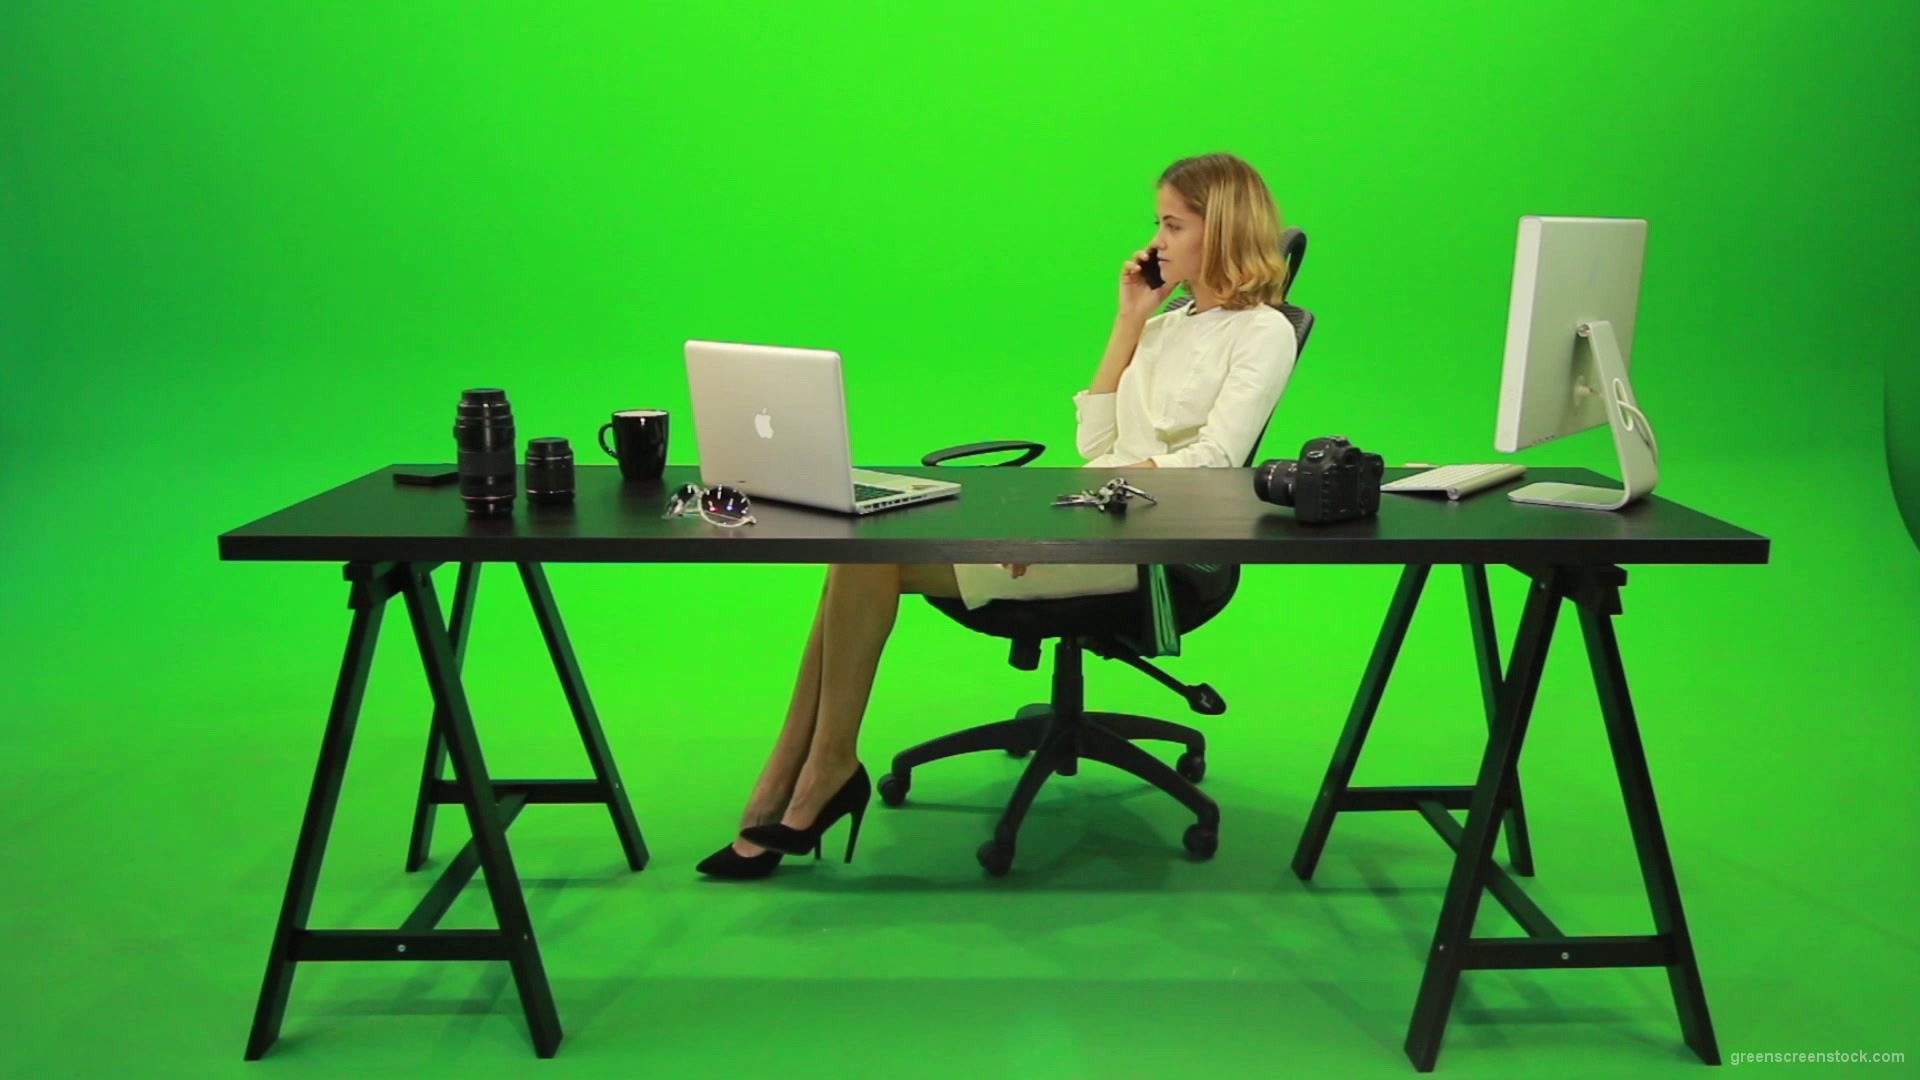 Angry-Business-Woman-Talking-on-the-Phone-Green-Screen-Footage_008 Green Screen Stock